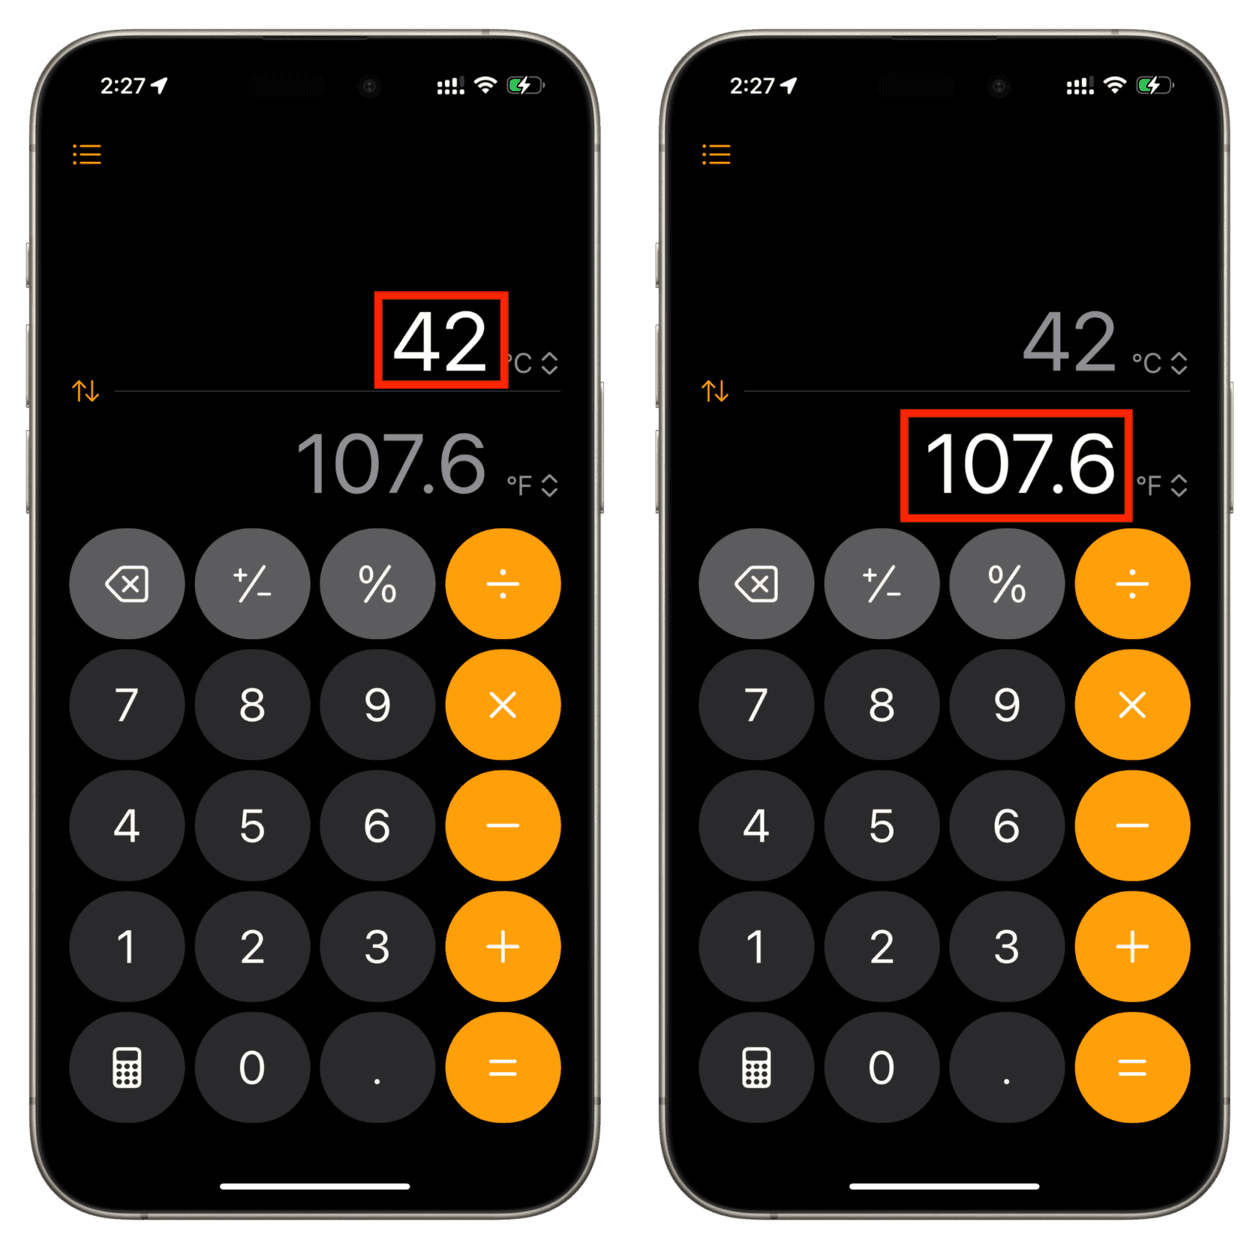 Tap to select value in iPhone Calculator app